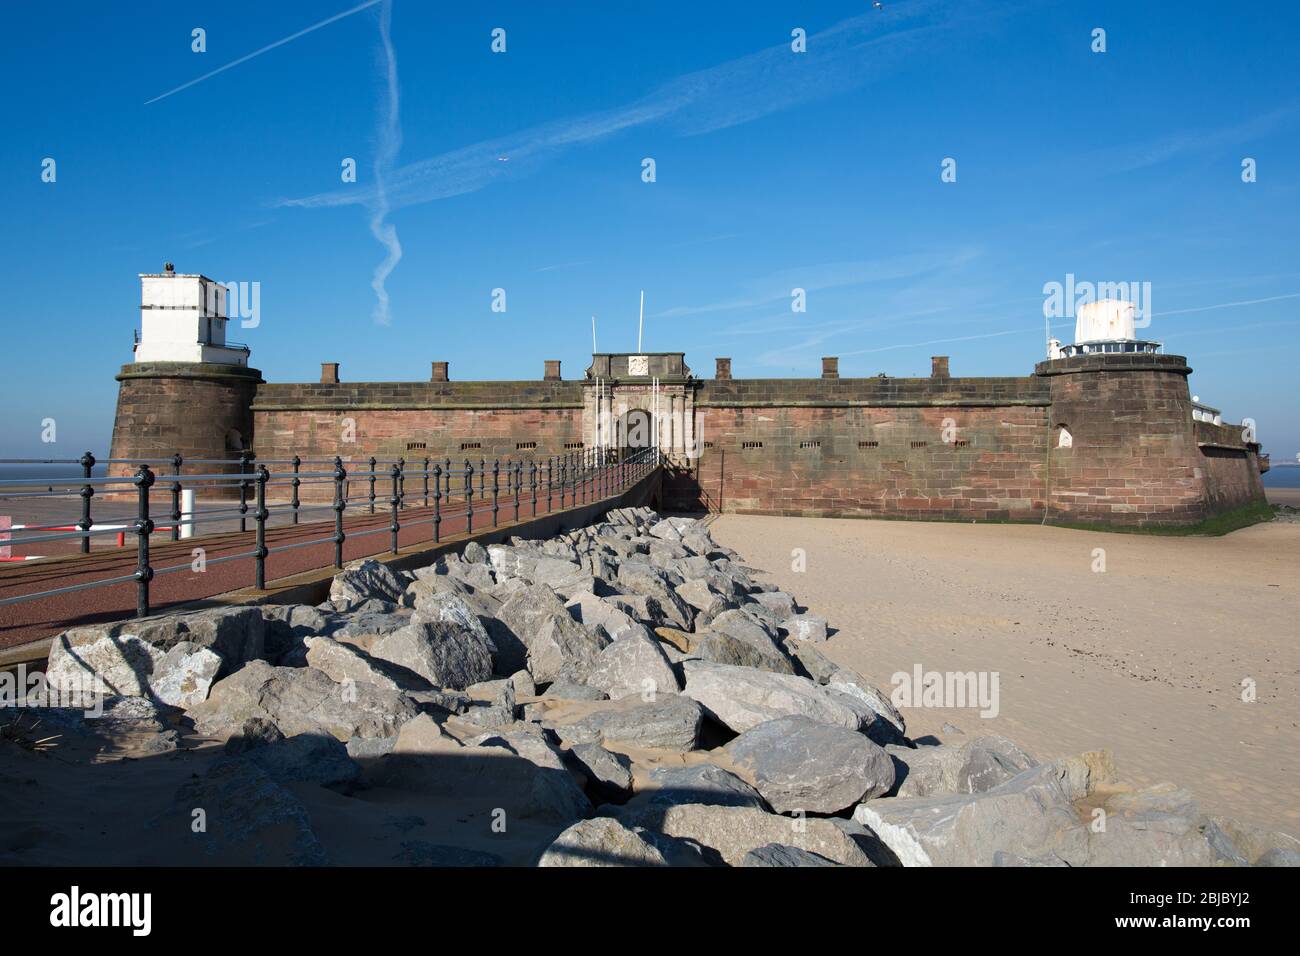 Town of Wallasey, England. Picturesque view of Fort Perch Rock located at the mouth of the Mersey Estuary. Stock Photo